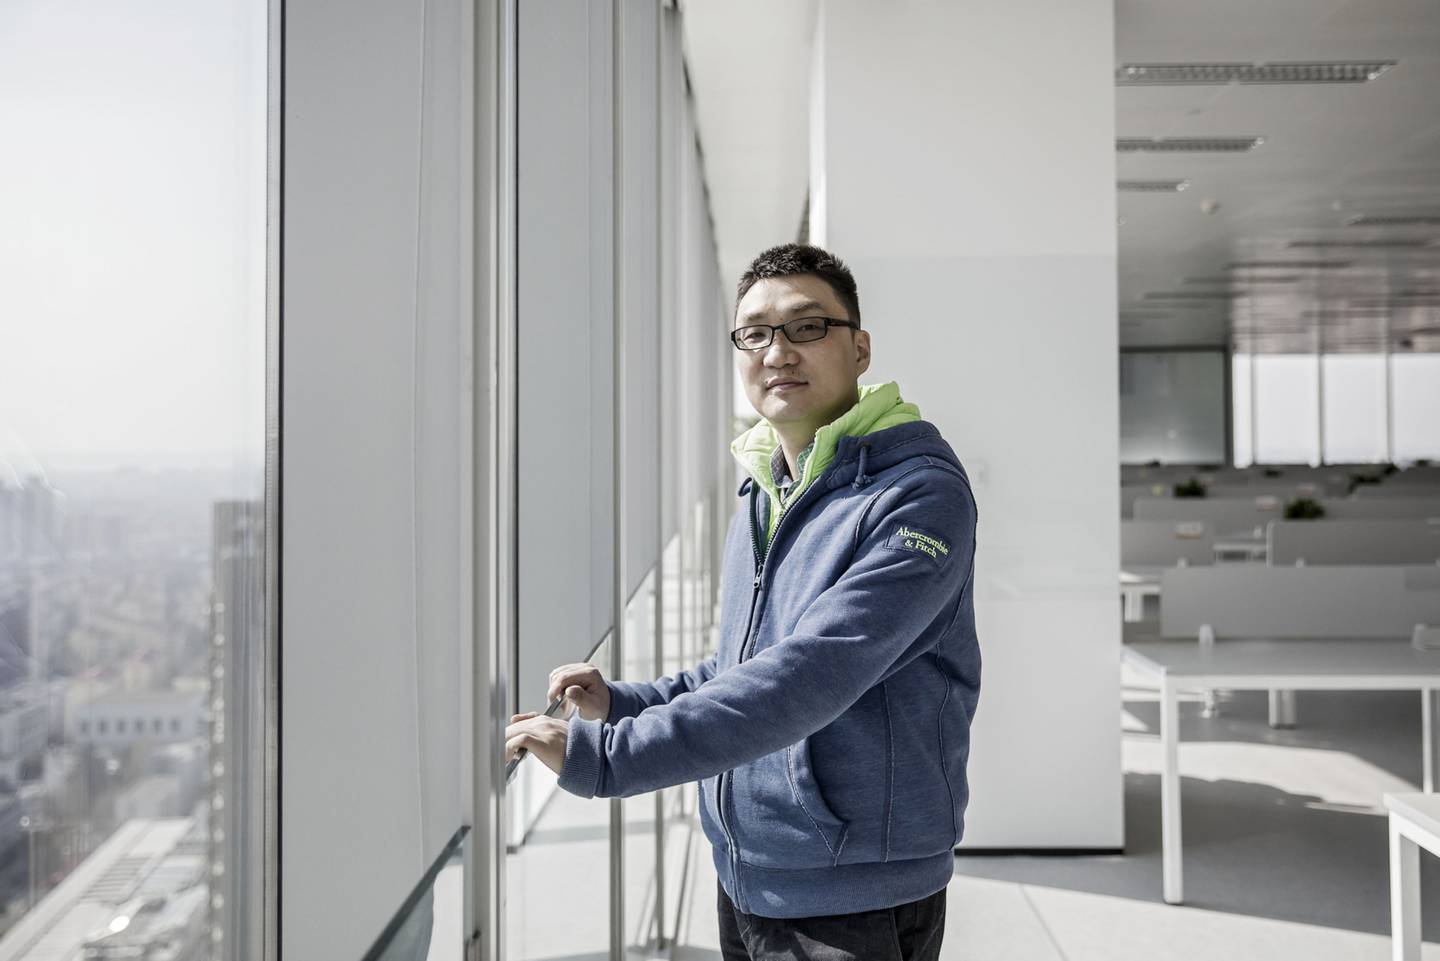 Colin Huang, chief executive officer and founder of Pinduoduo, poses for a photograph at the company's office in Shanghai, China.